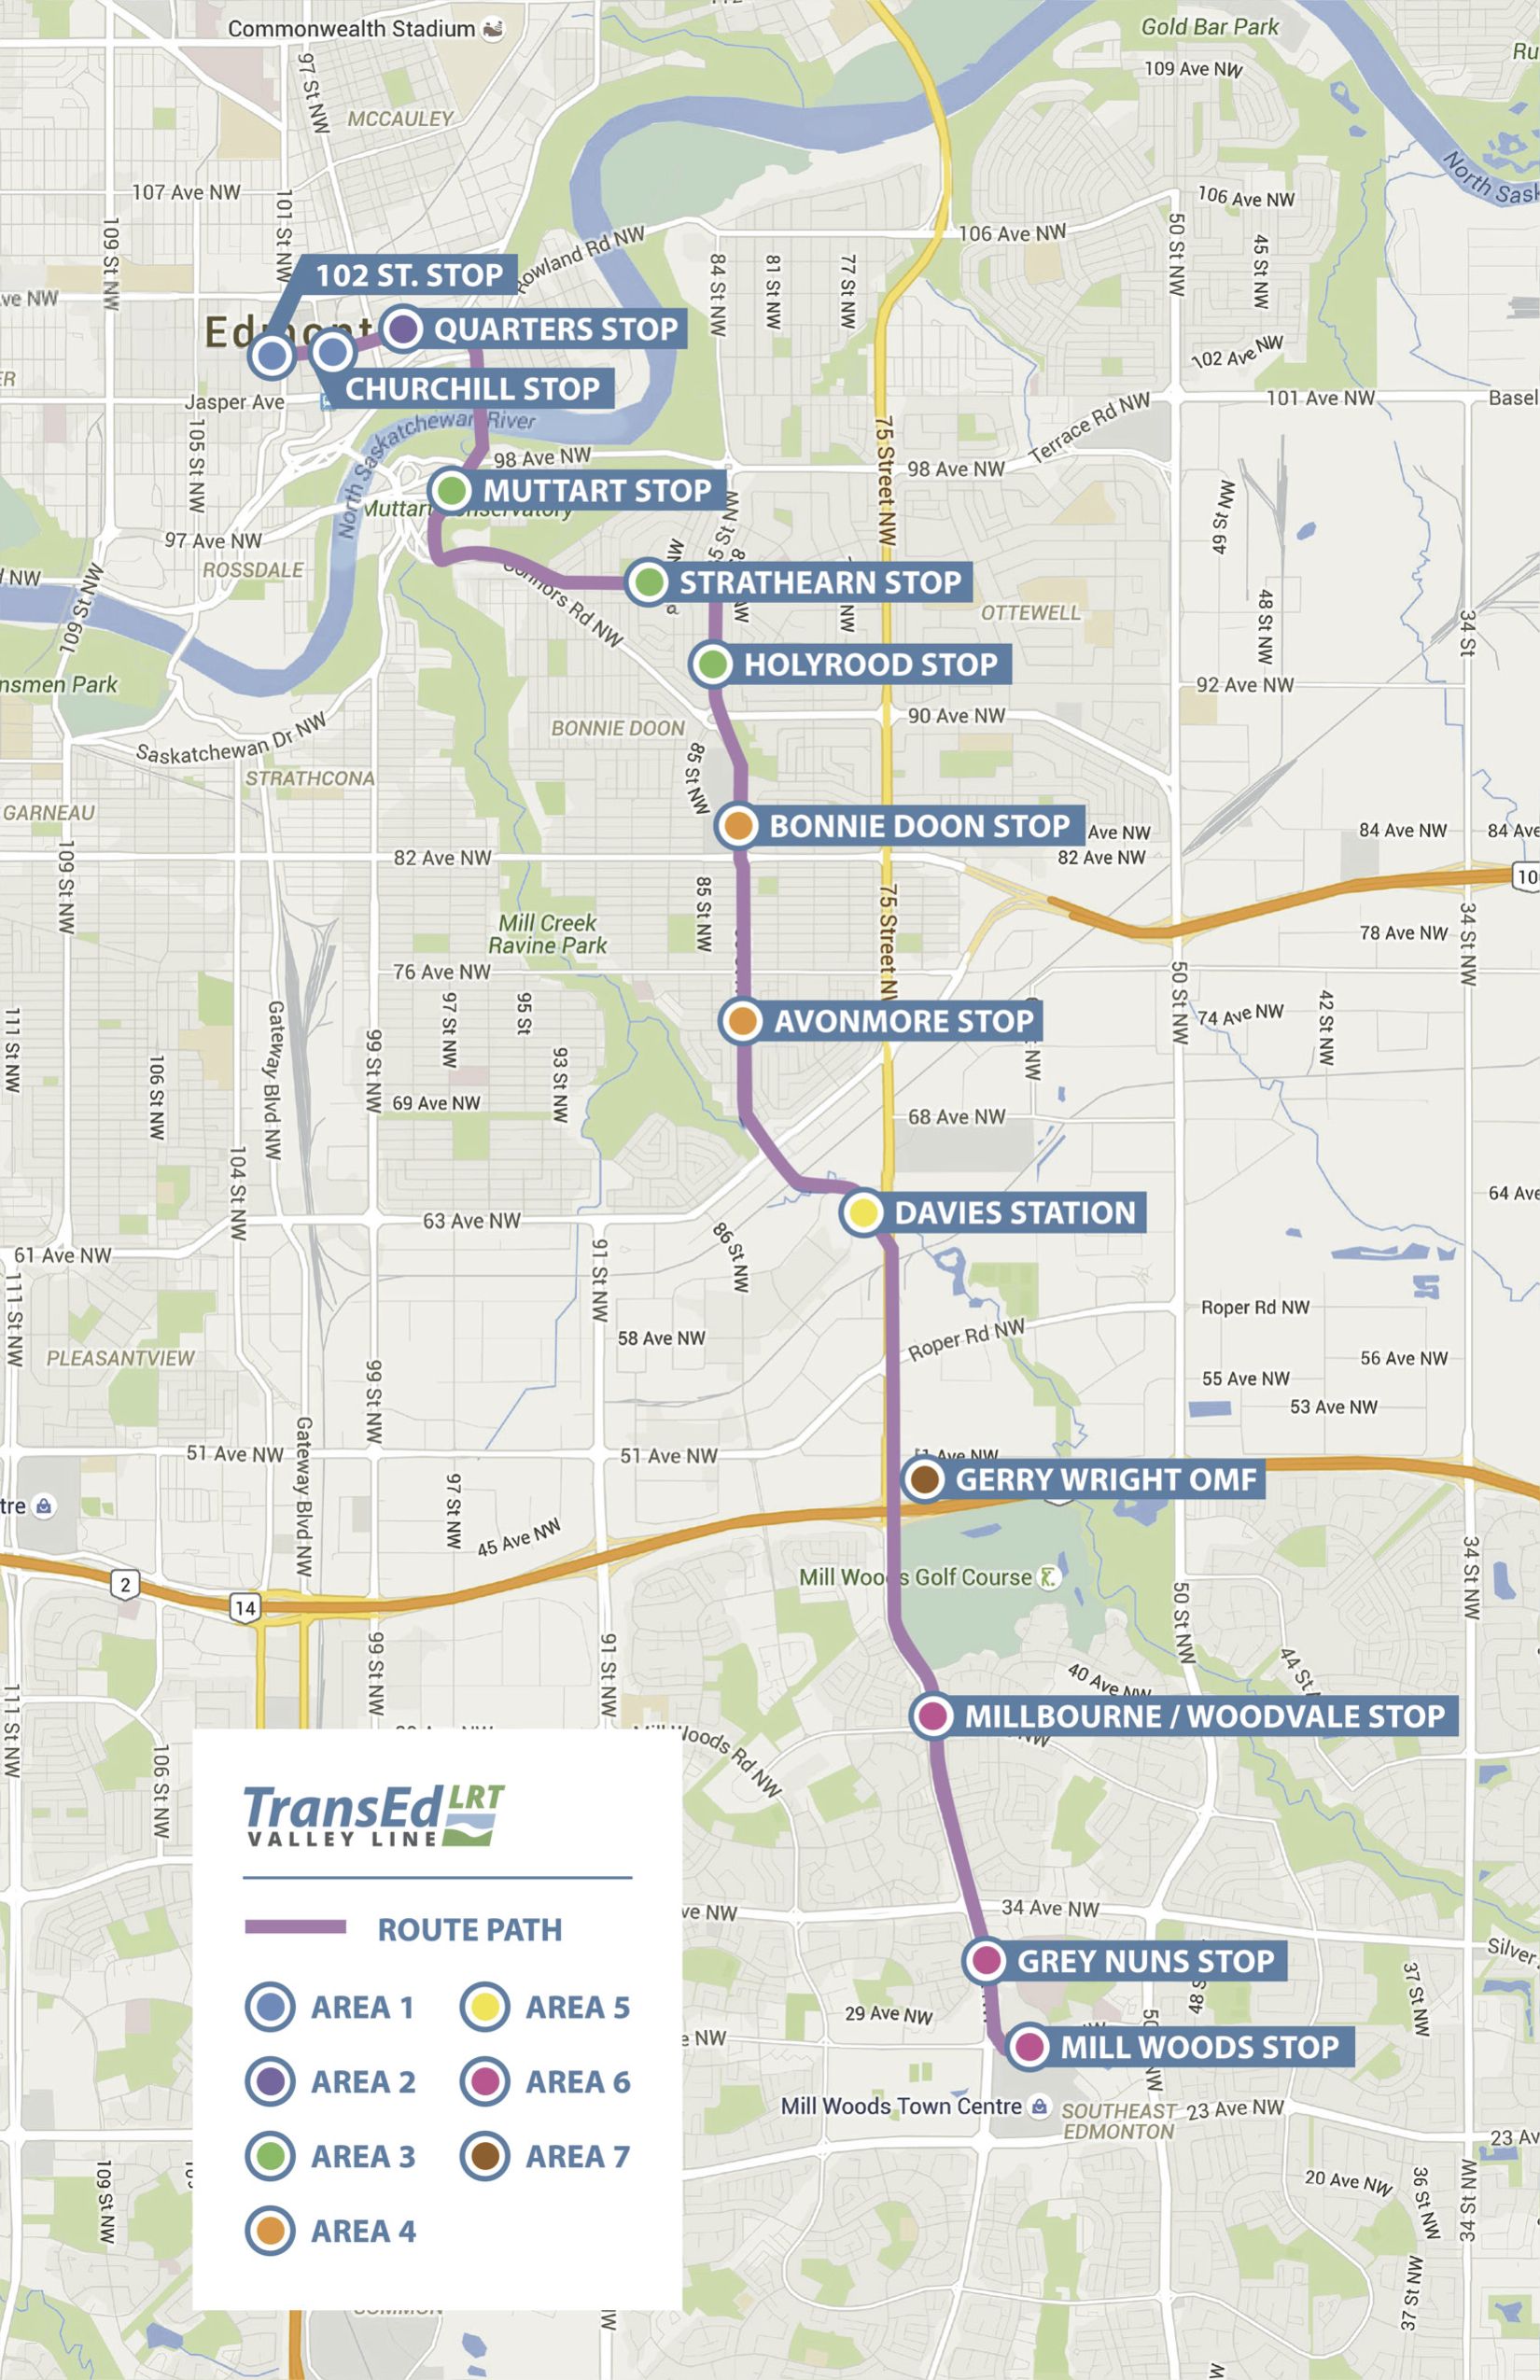 transed-routemap-areacoded-web